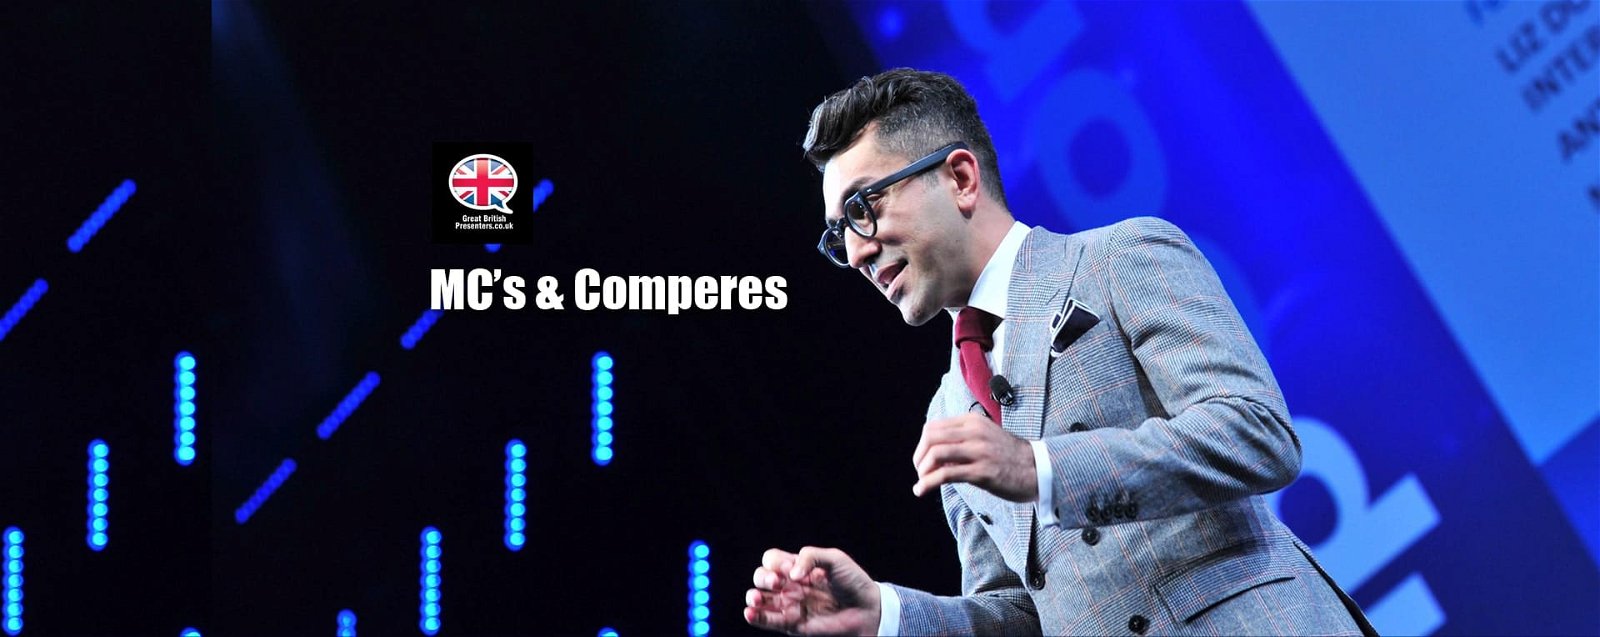 Live Event Corporate MCs & Comperes hosts at Great British Presenters-min